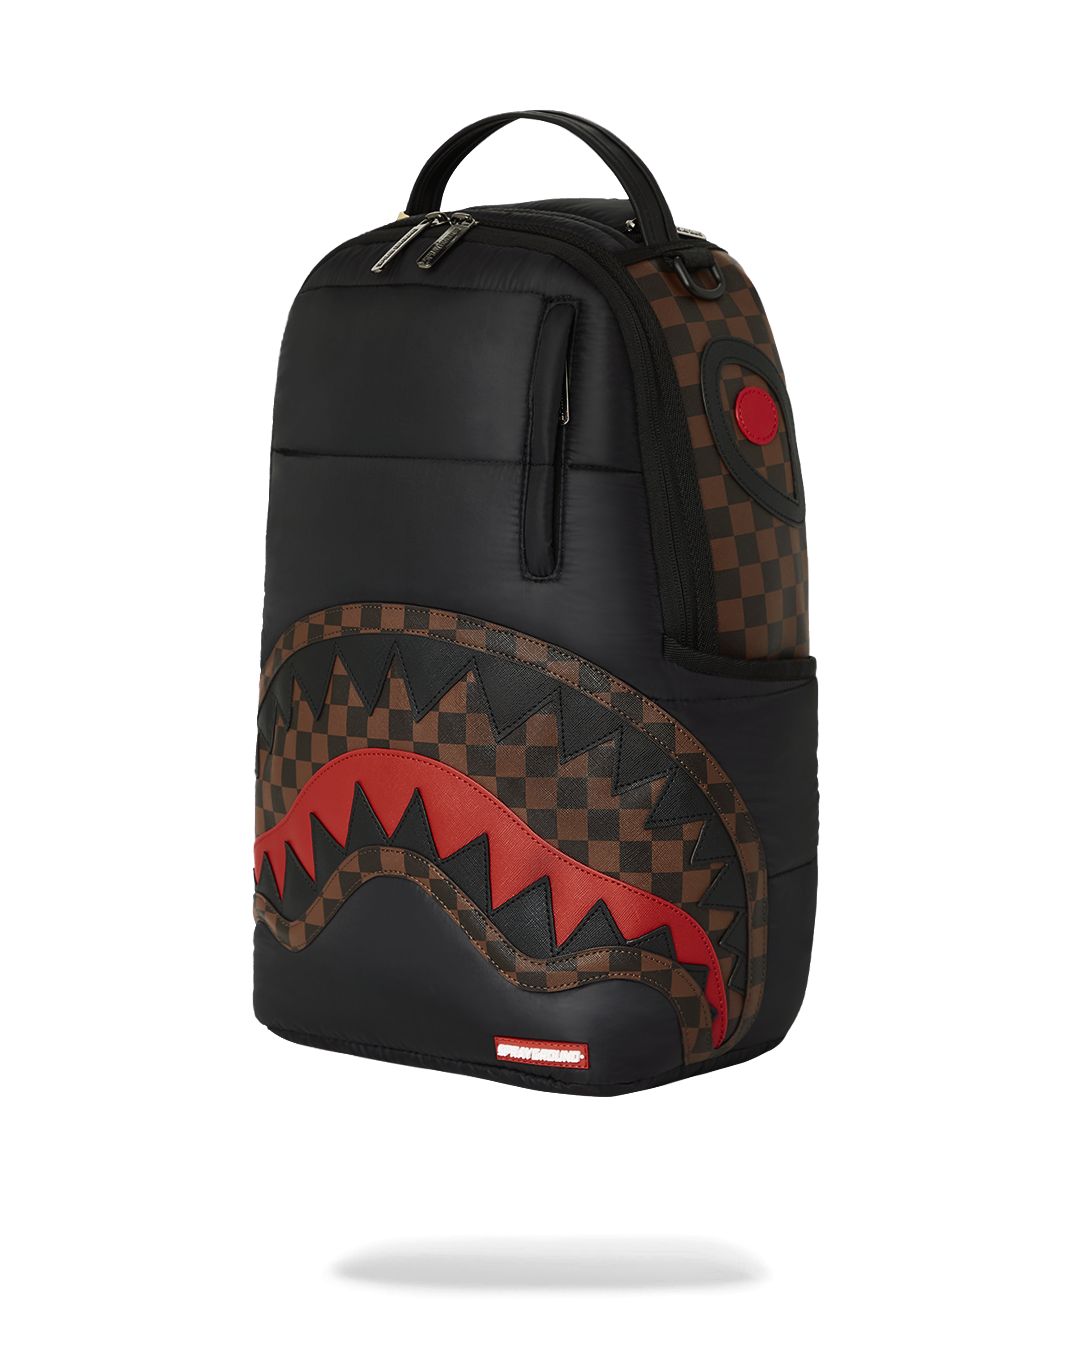 SHARKS IN PARIS PUFFER DLXSF BACKPACK